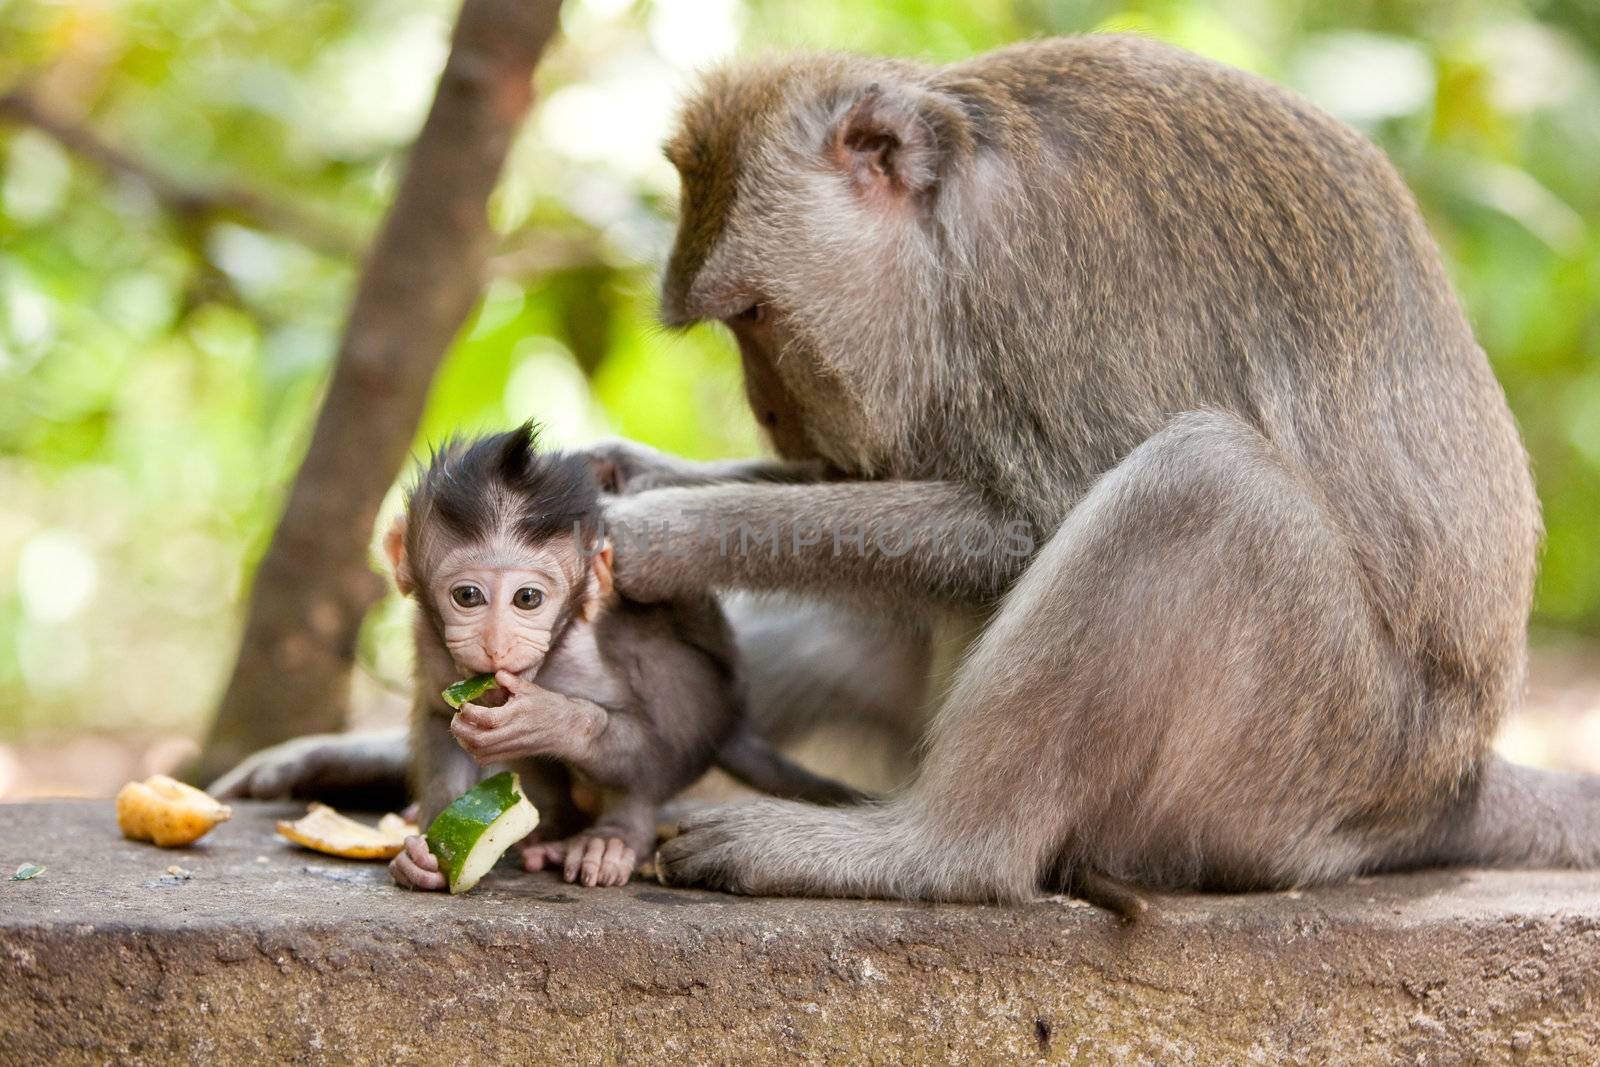 Cute little babymonkey being groomed by mom while eating